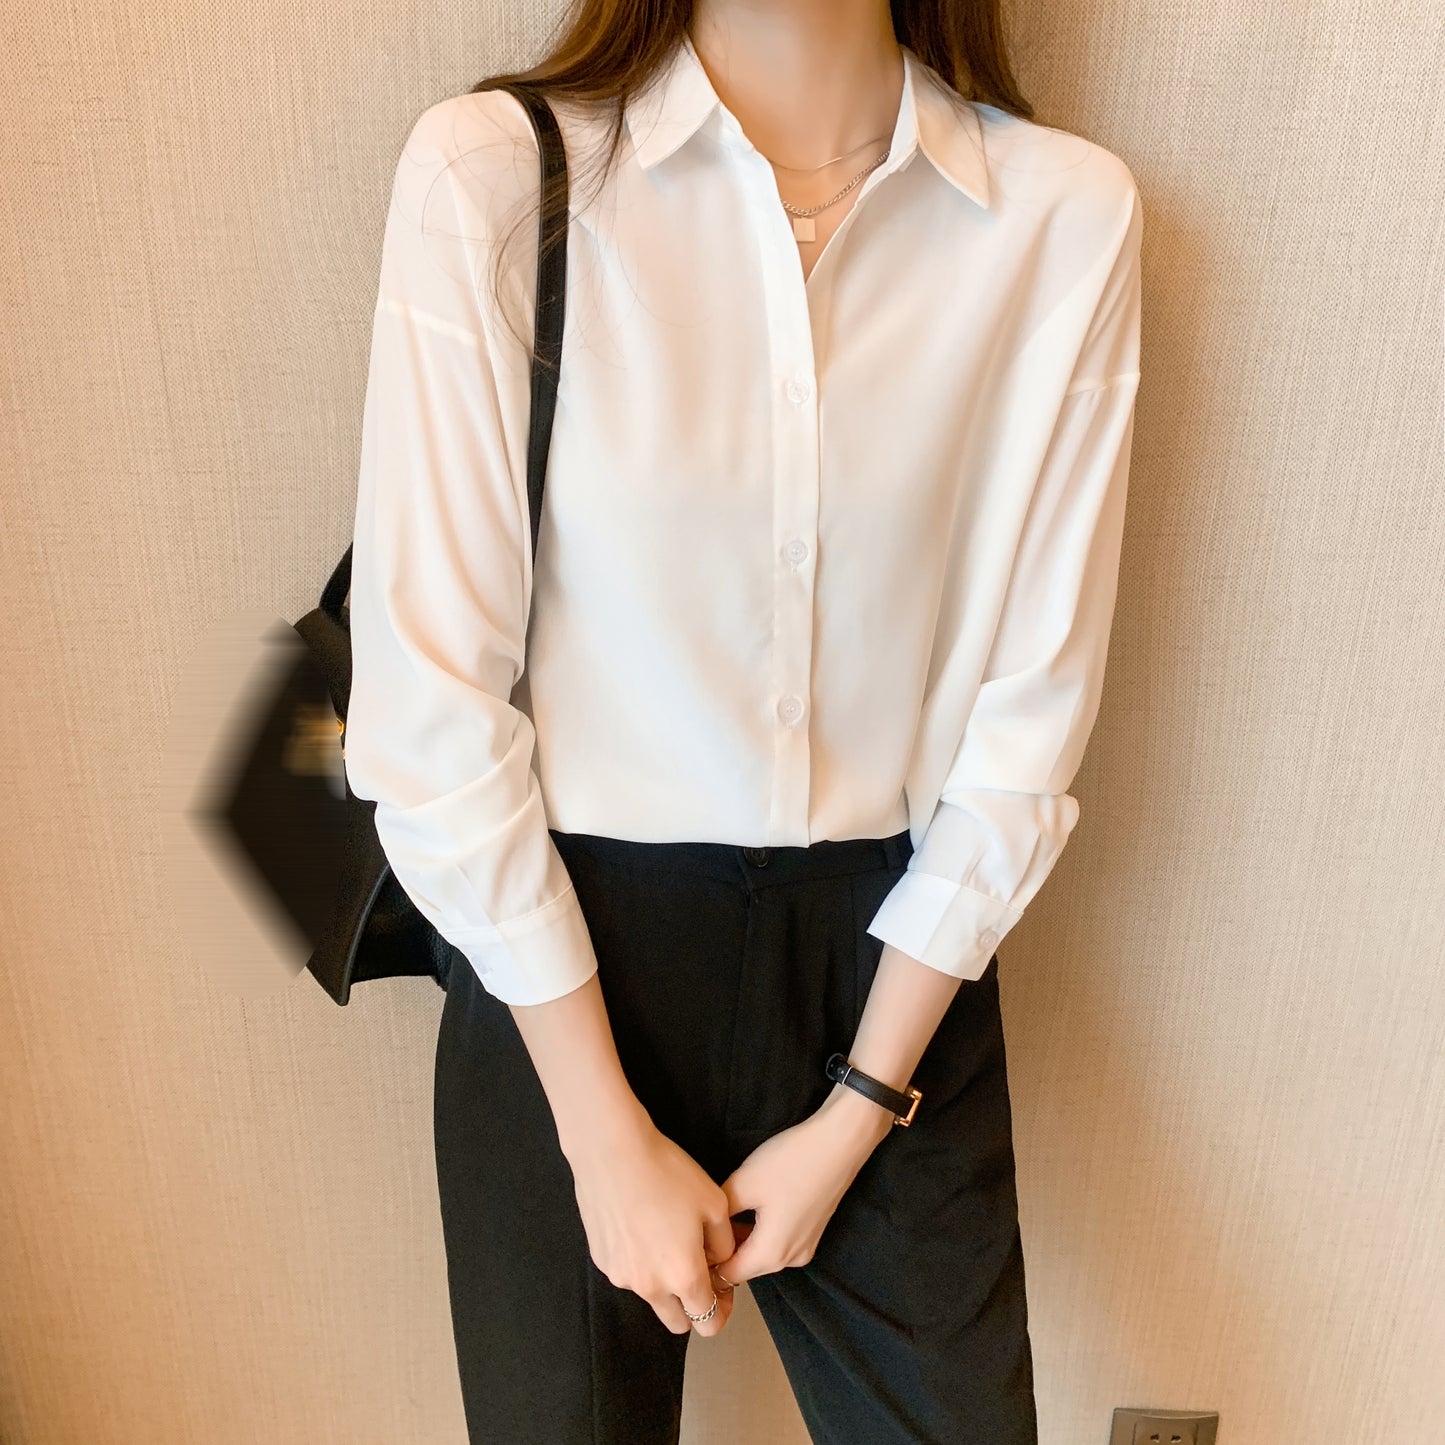 Solid Blouse Elegant V Neck Long Sleeve Work Tops Button Down Shirt Casual Long Sleeve Tops